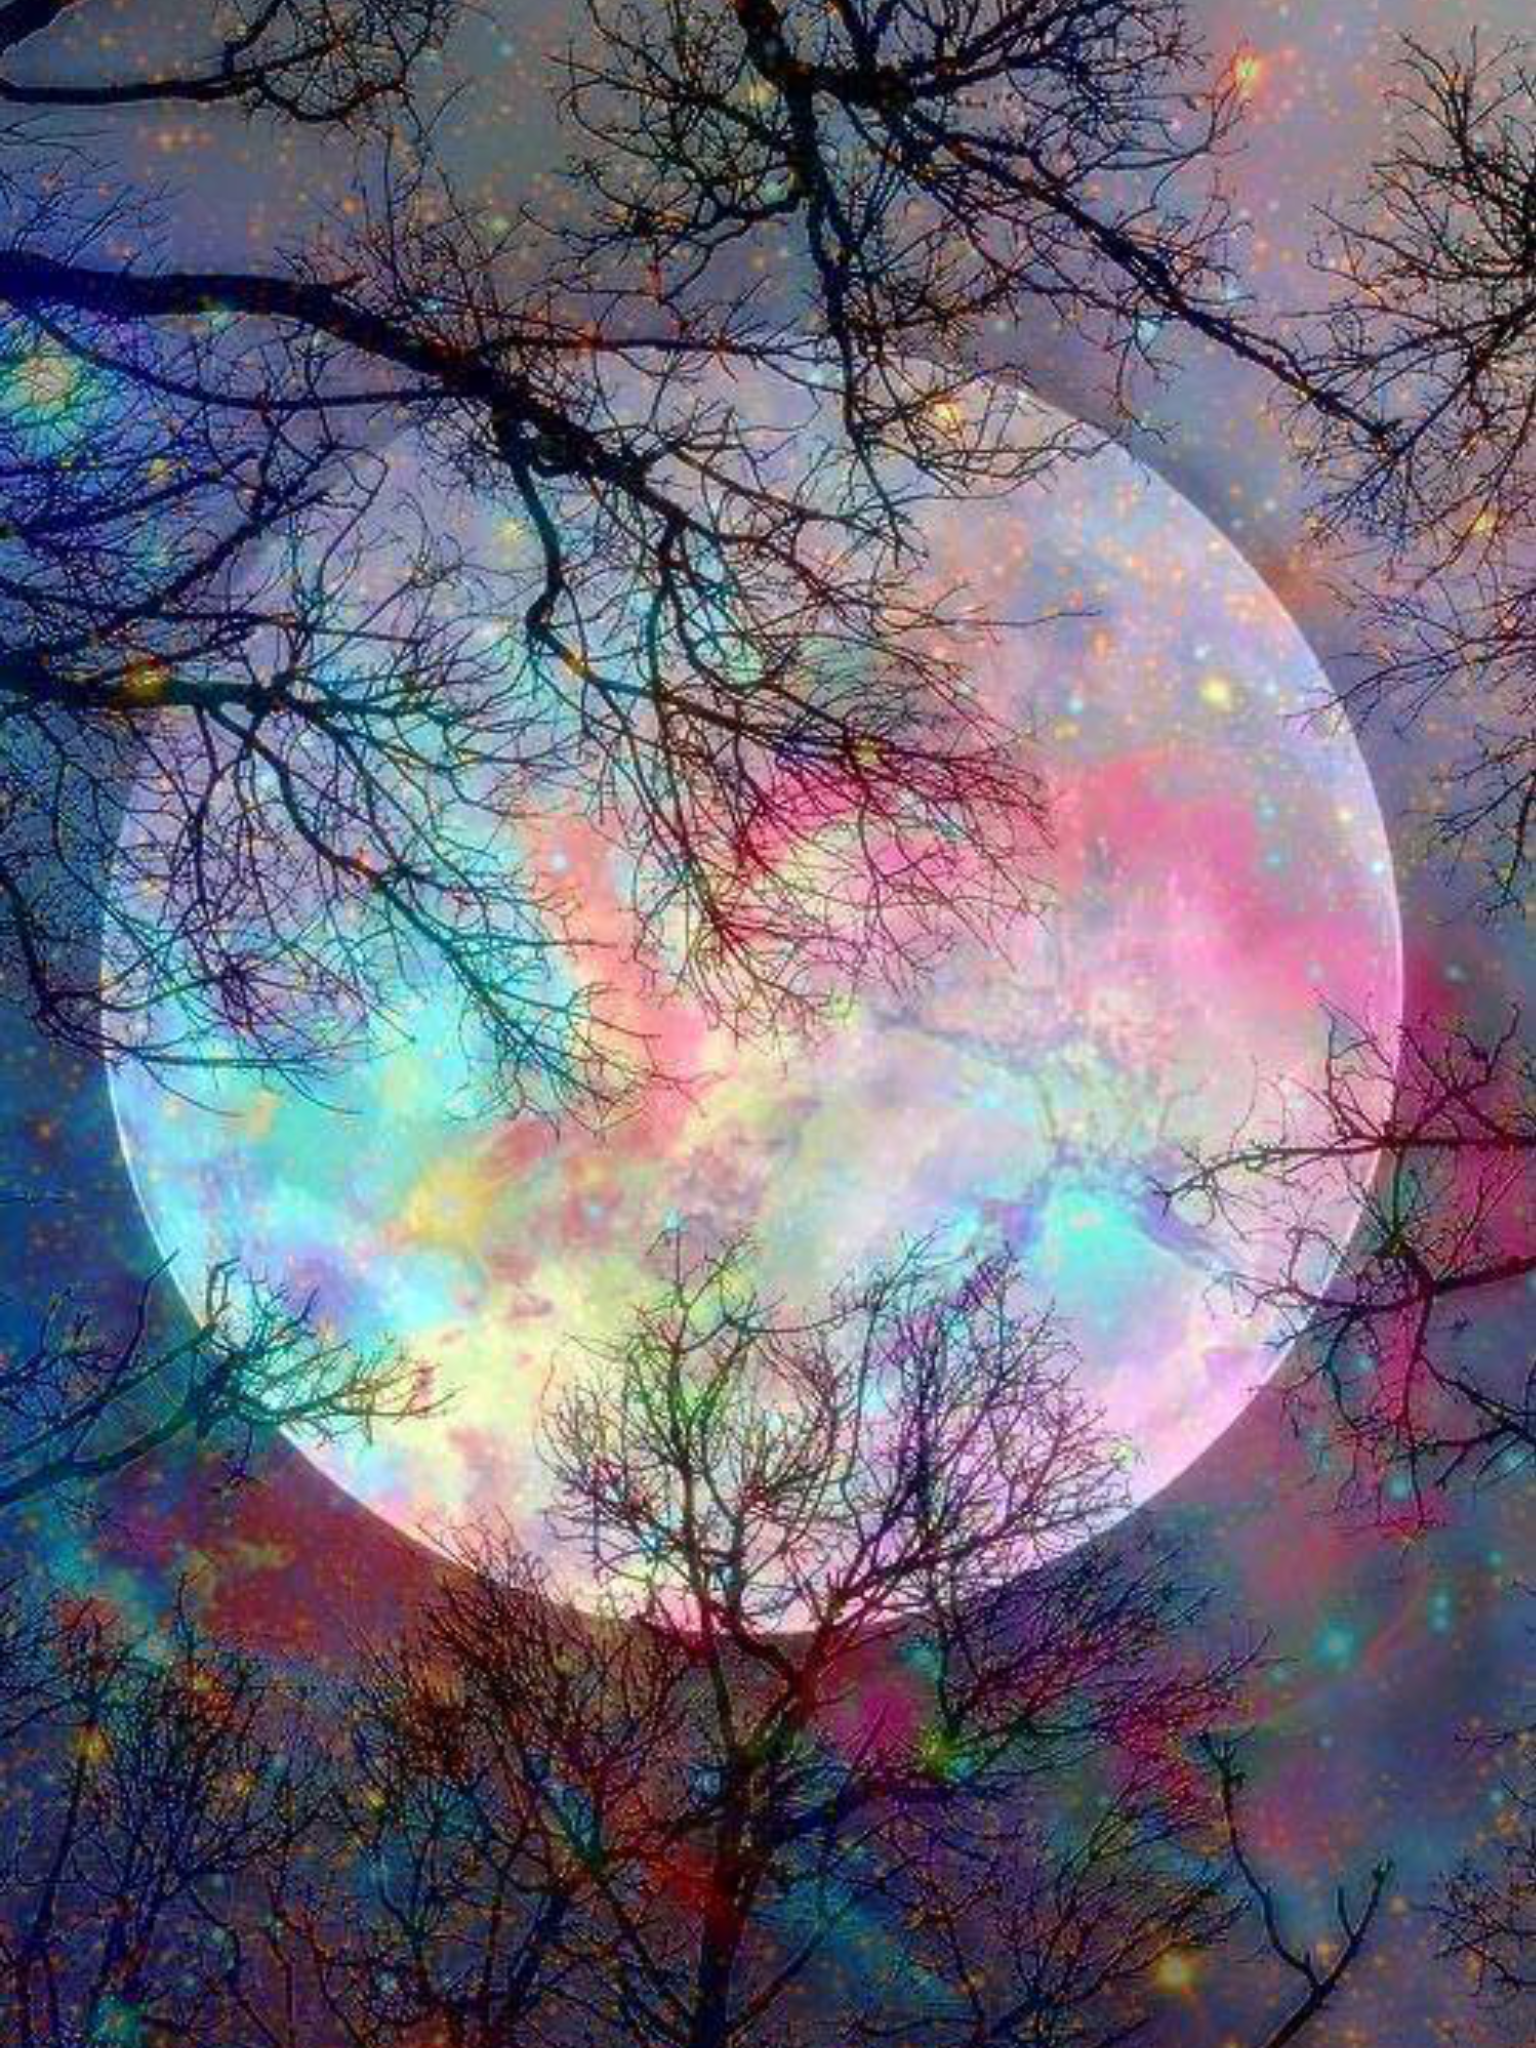 That magical fantasy creation. a wintry moon of opal. Nature